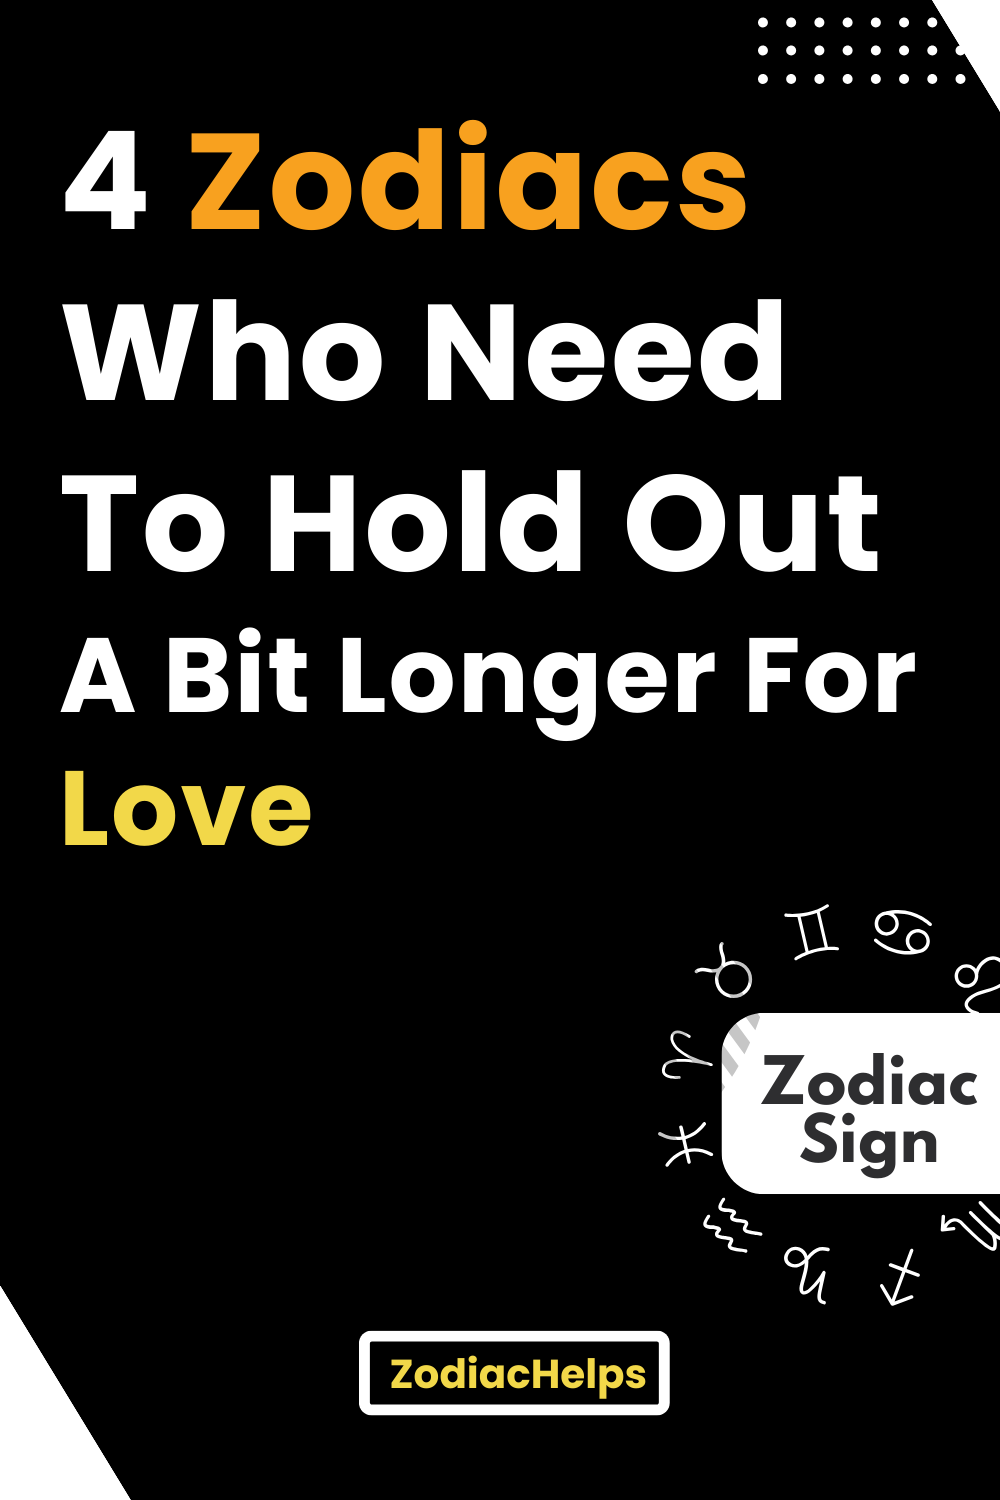 4 Zodiacs Who Need To Hold Out A Bit Longer For Love | zodiac Signs